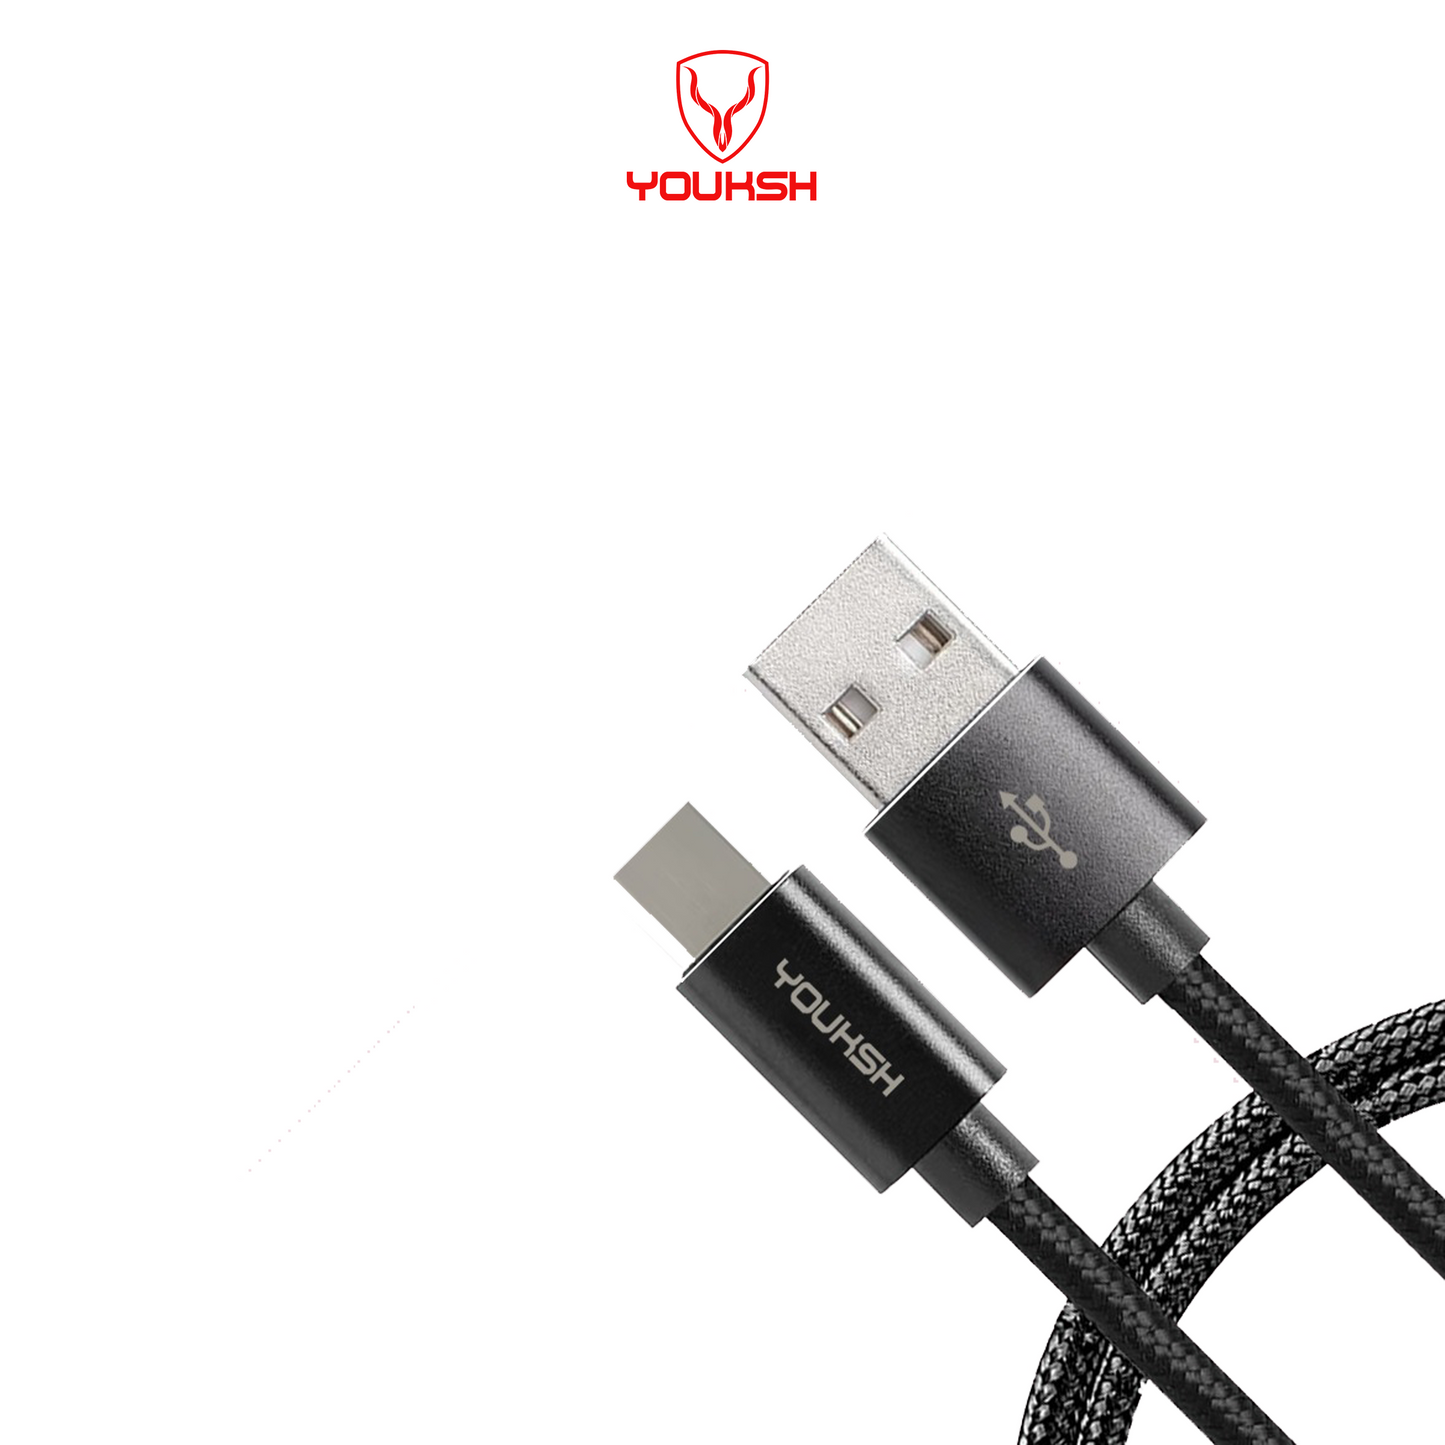 YOUKSH Mark-C Power Bank Cable - Fast Transmission - High Quailty - 20cm - Non Breakable Power Bank Cable - Android.